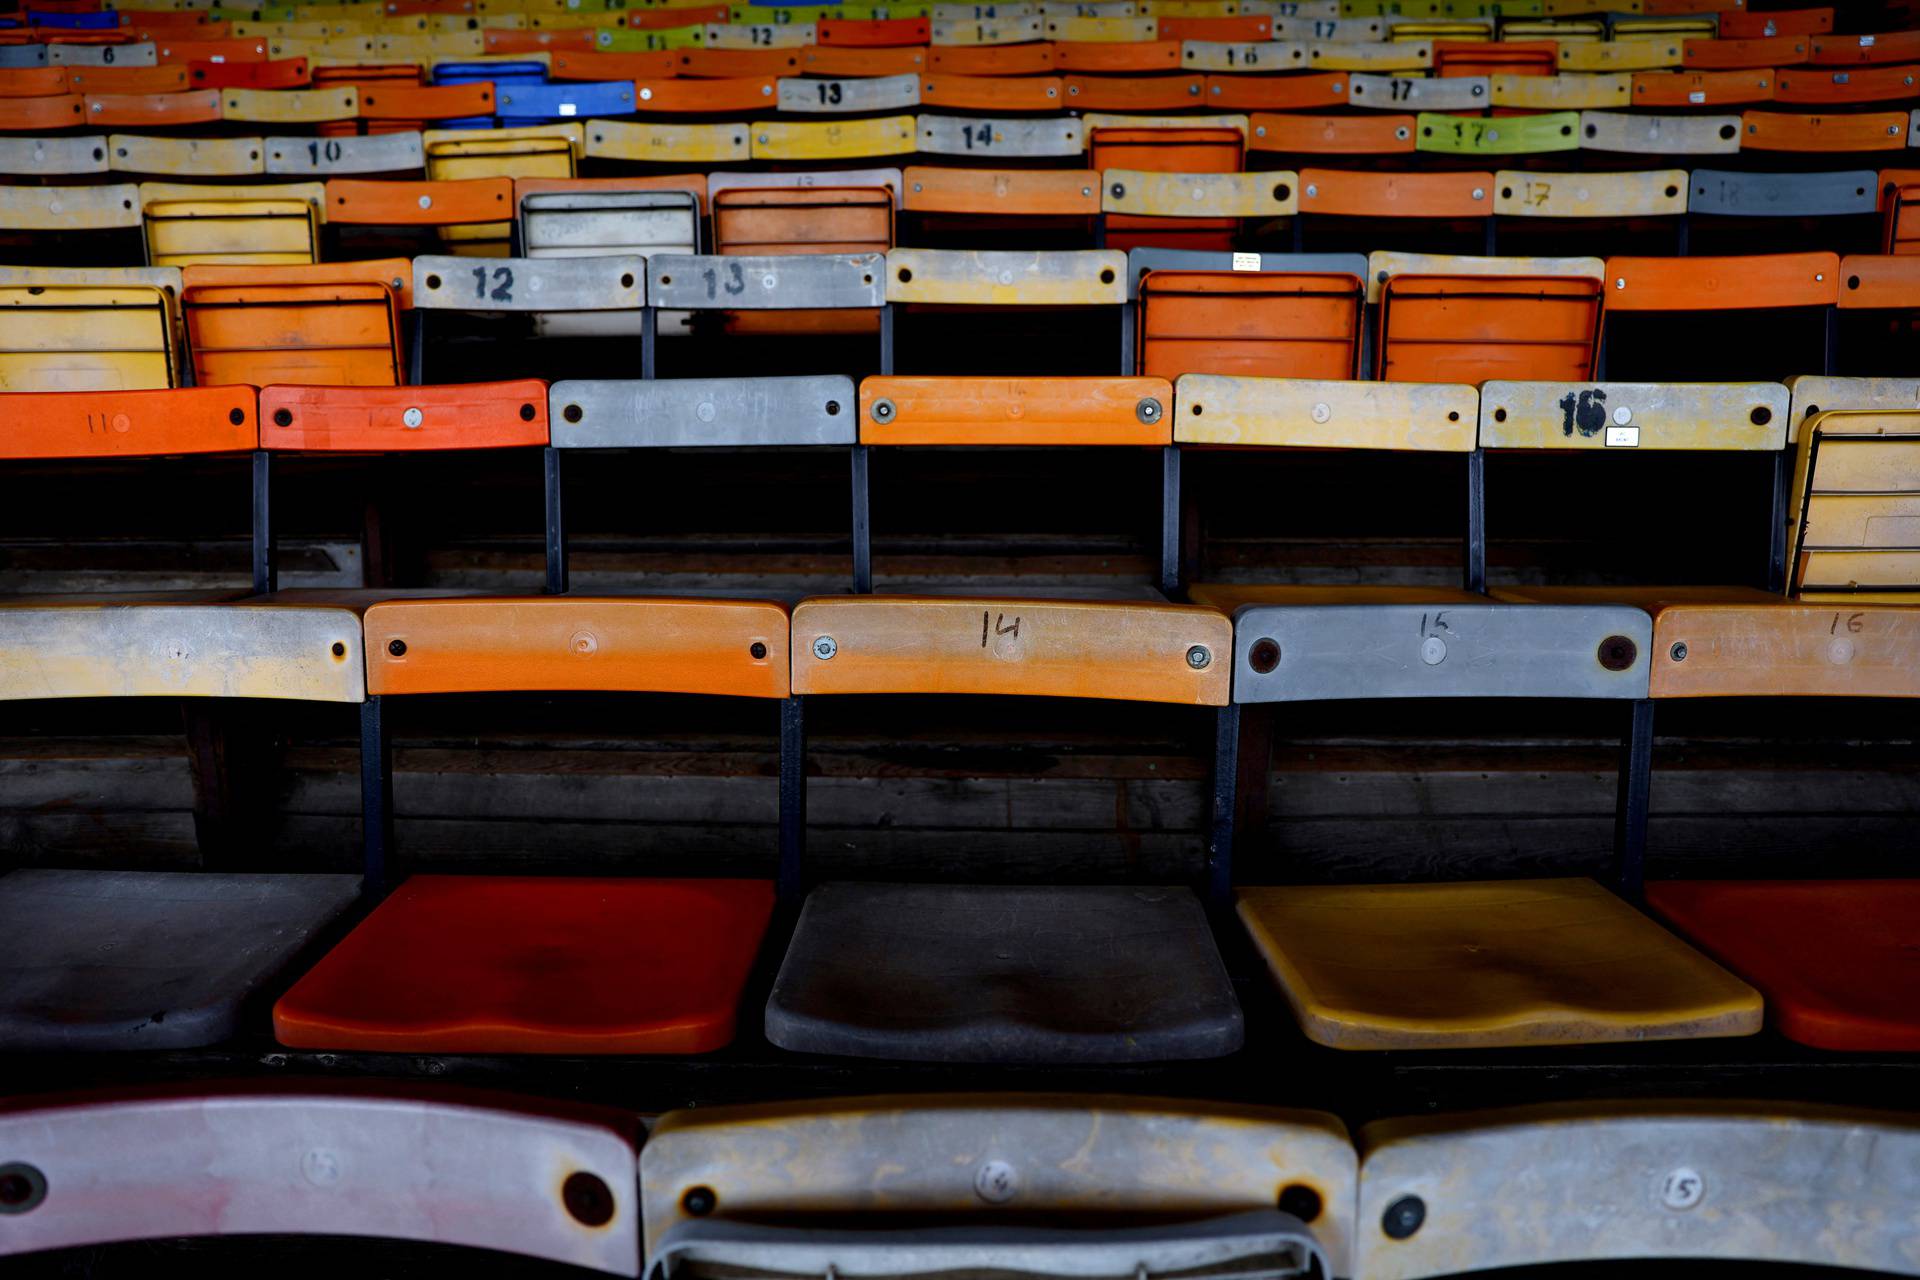 A view of seats in Luton Town's Kenilworth Road stadium